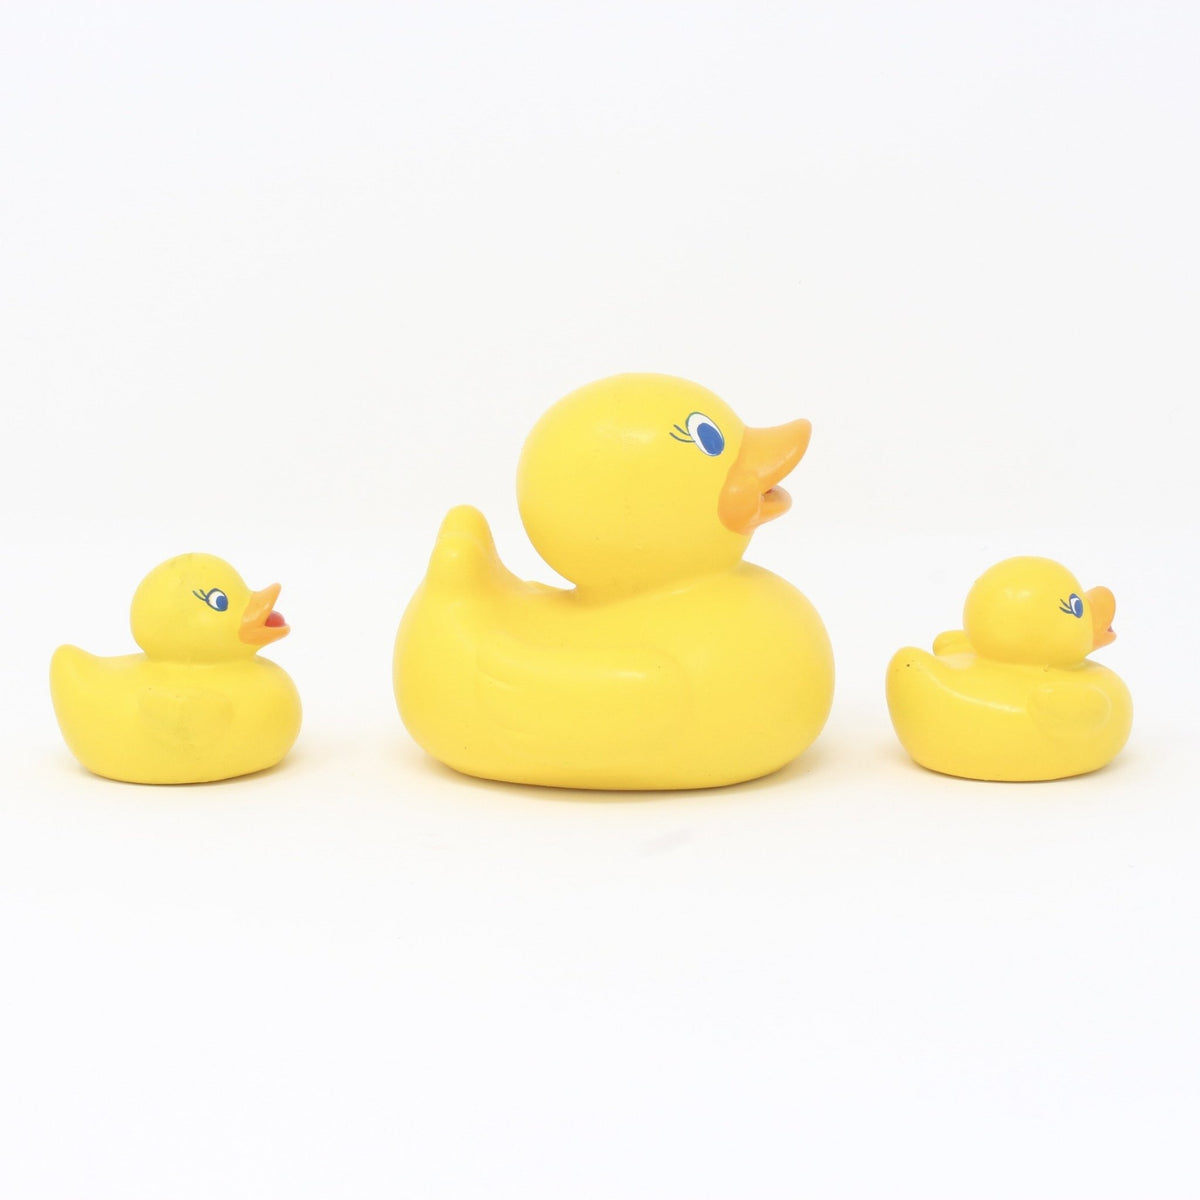 Rubber Duck Family (3-Piece Set) - Natural Rubber Toys